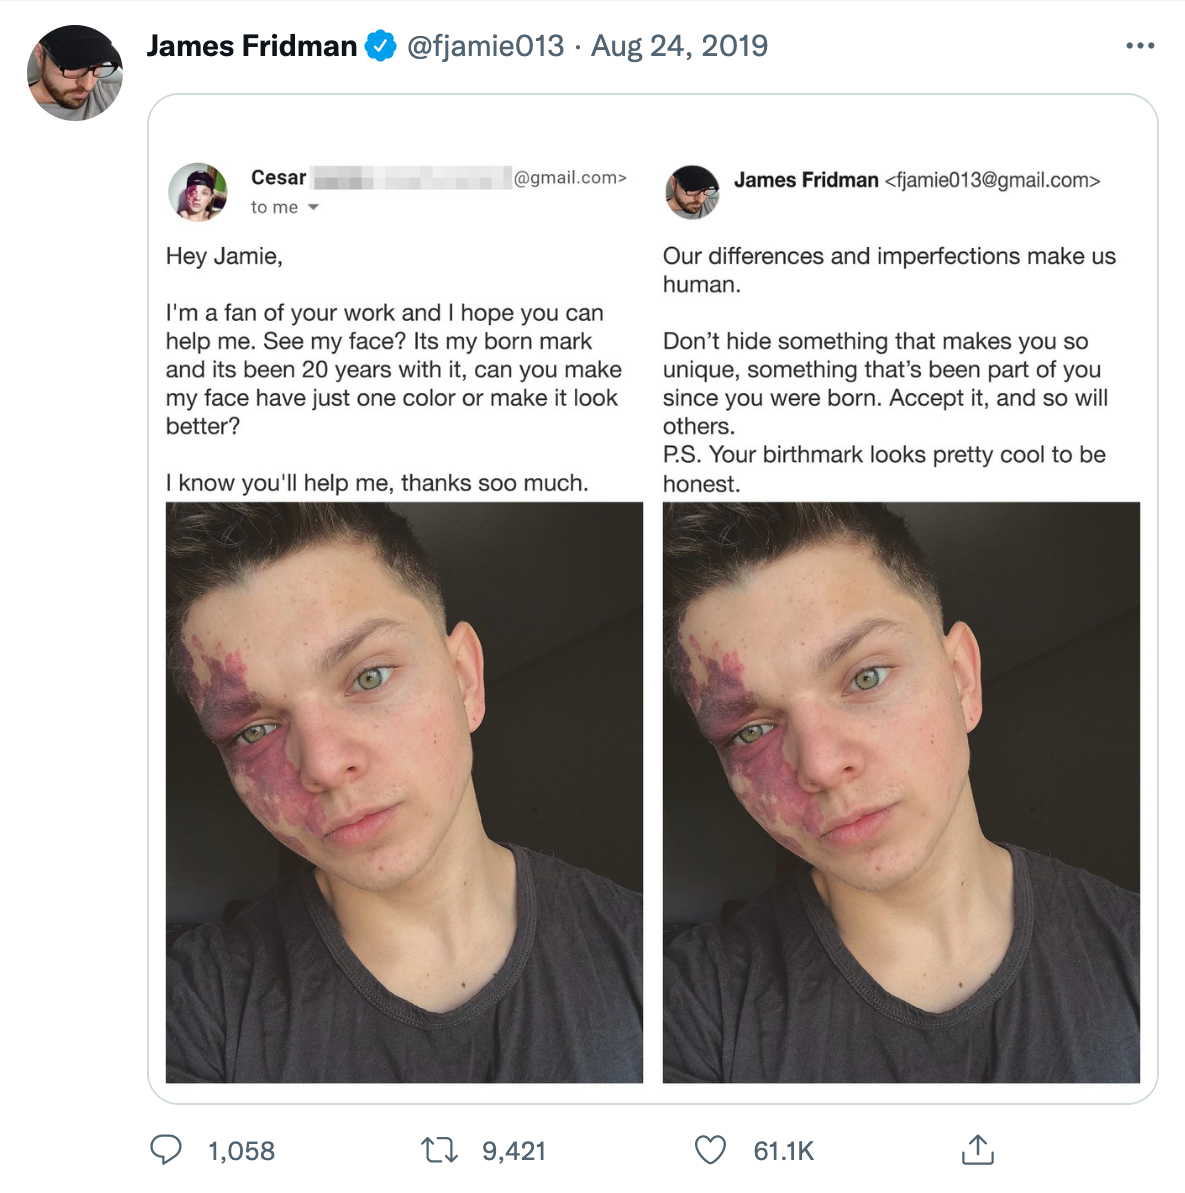 wholesome photoshop edits - james fridman birthmark - James Fridman Cesar to me. O Hey Jamie, I'm a fan of your work and I hope you can help me. See my face? Its my born mark and its been 20 years with it, can you make my face have just one color or make 